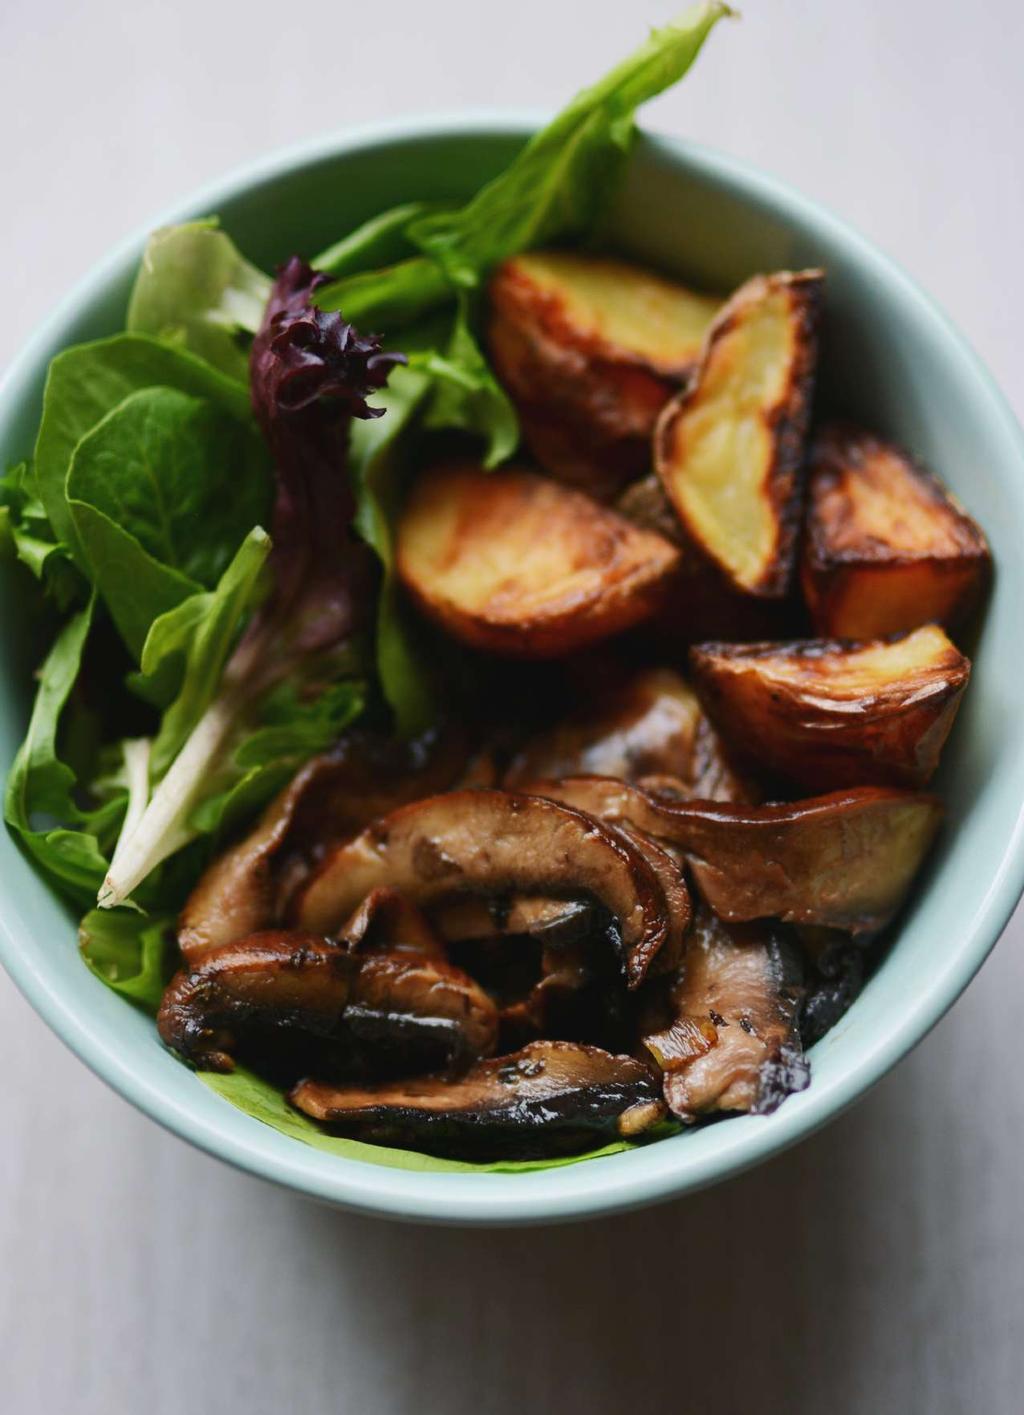 Maple Mustard Potato Wedge Bowl (783 cals) Prep time - 2 minutes/ Total time - 2 minutes Ingredients: 1 serving potato wedges (180 cals) 1 cup mixed greens (9